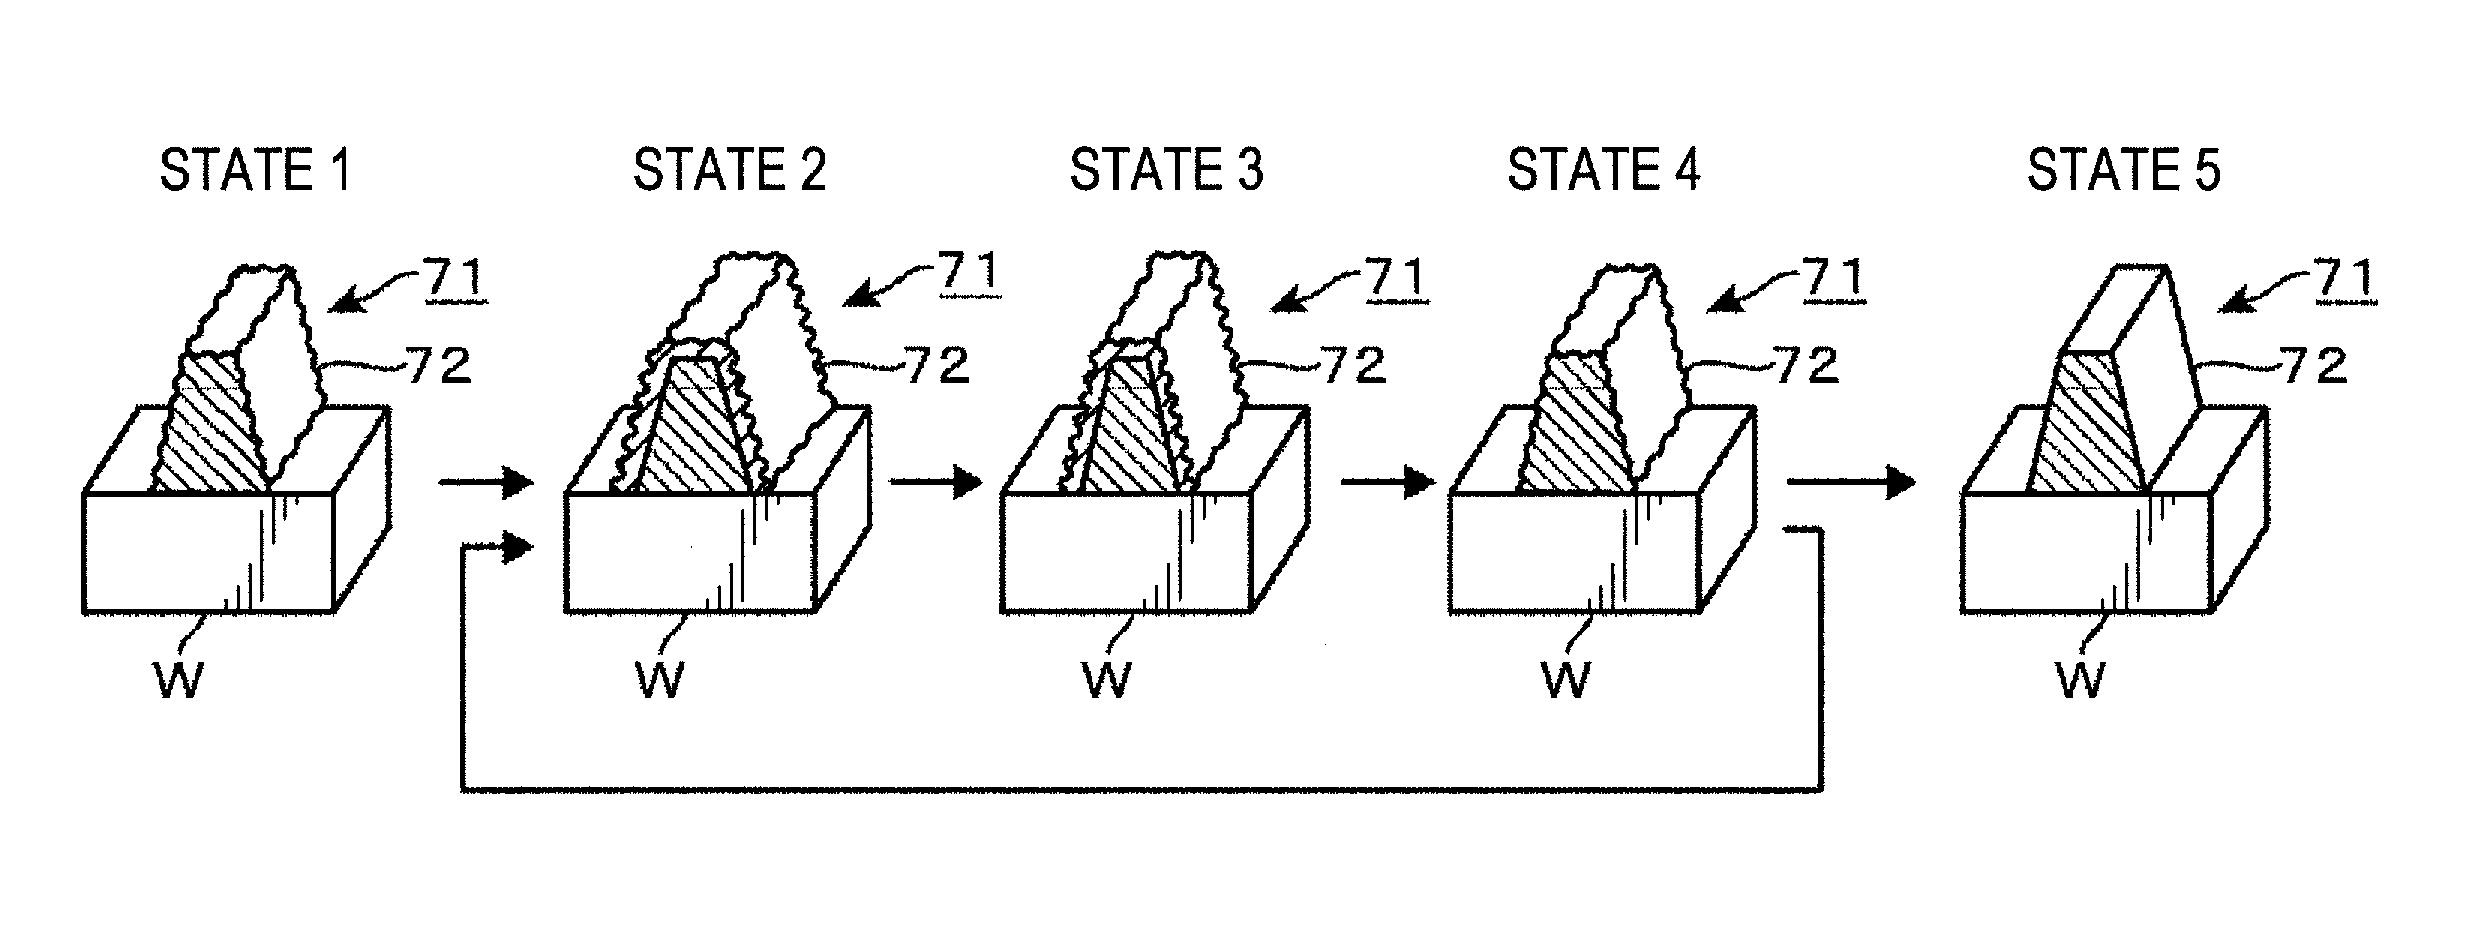 Substrate treatment method